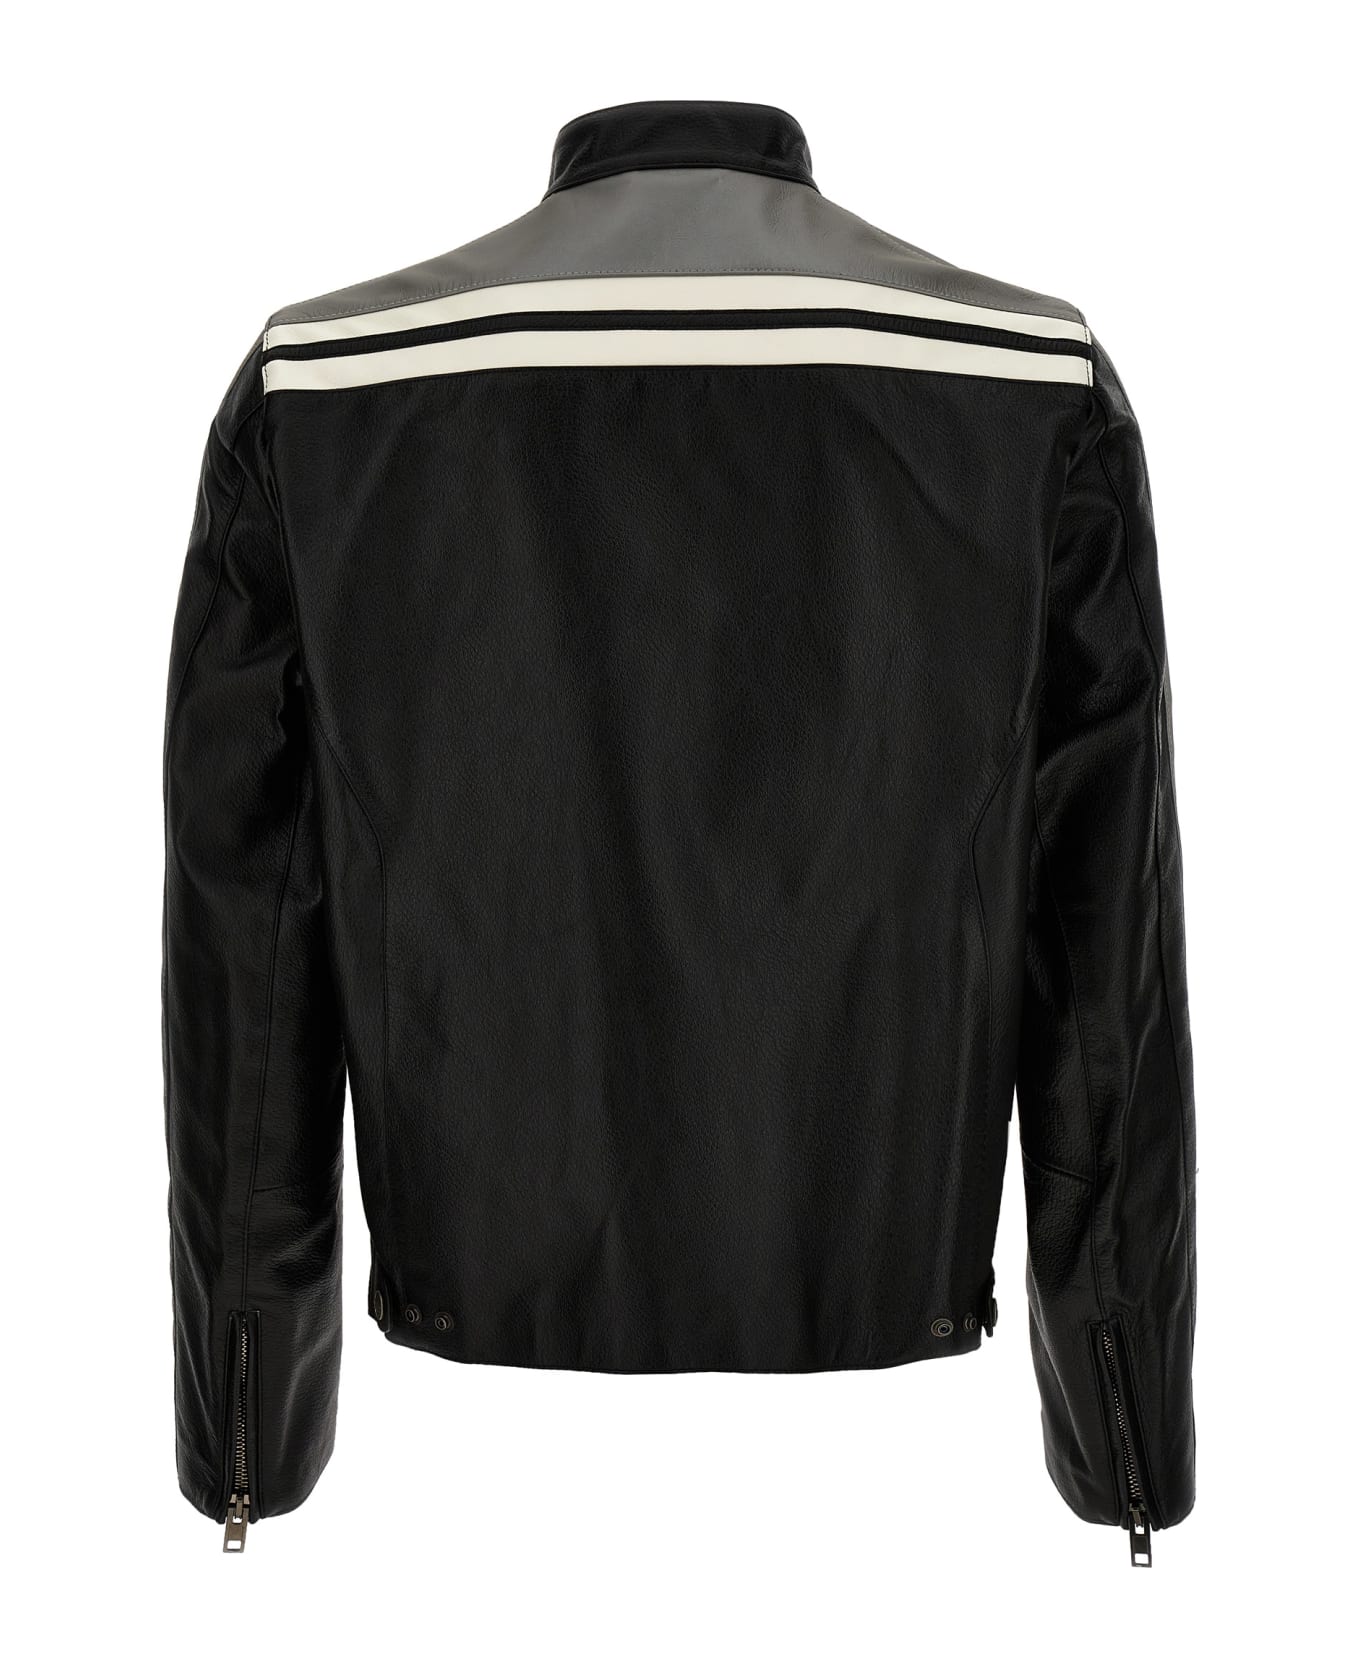 Moschino Leather Jacket With Contrasting Bands - Black   ジャケット